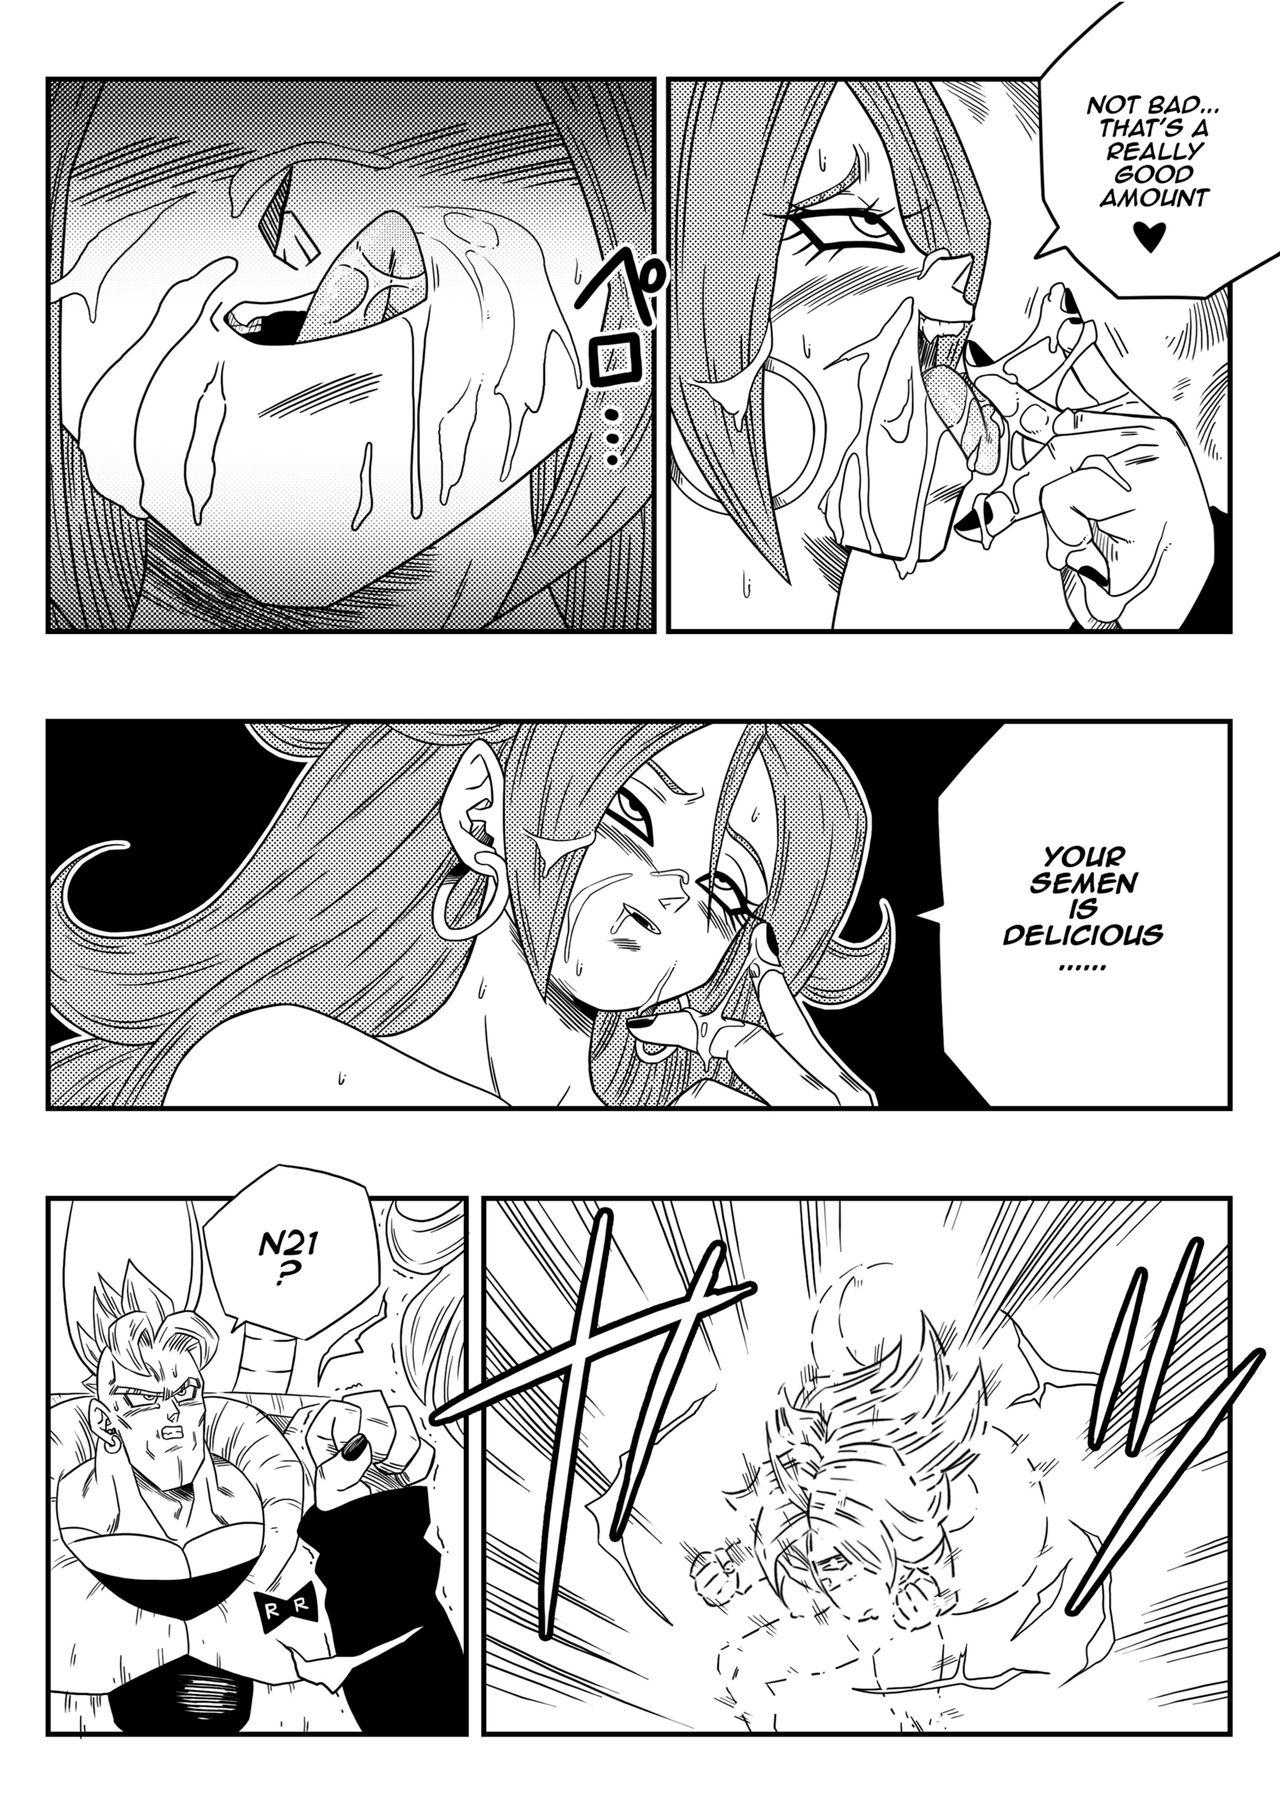 Dick Suck Kyonyuu Android Sekai Seiha o Netsubou!! Android 21 Shutsugen!! | Busty Android Wants to Dominate the World! - Dragon ball Parody - Page 9